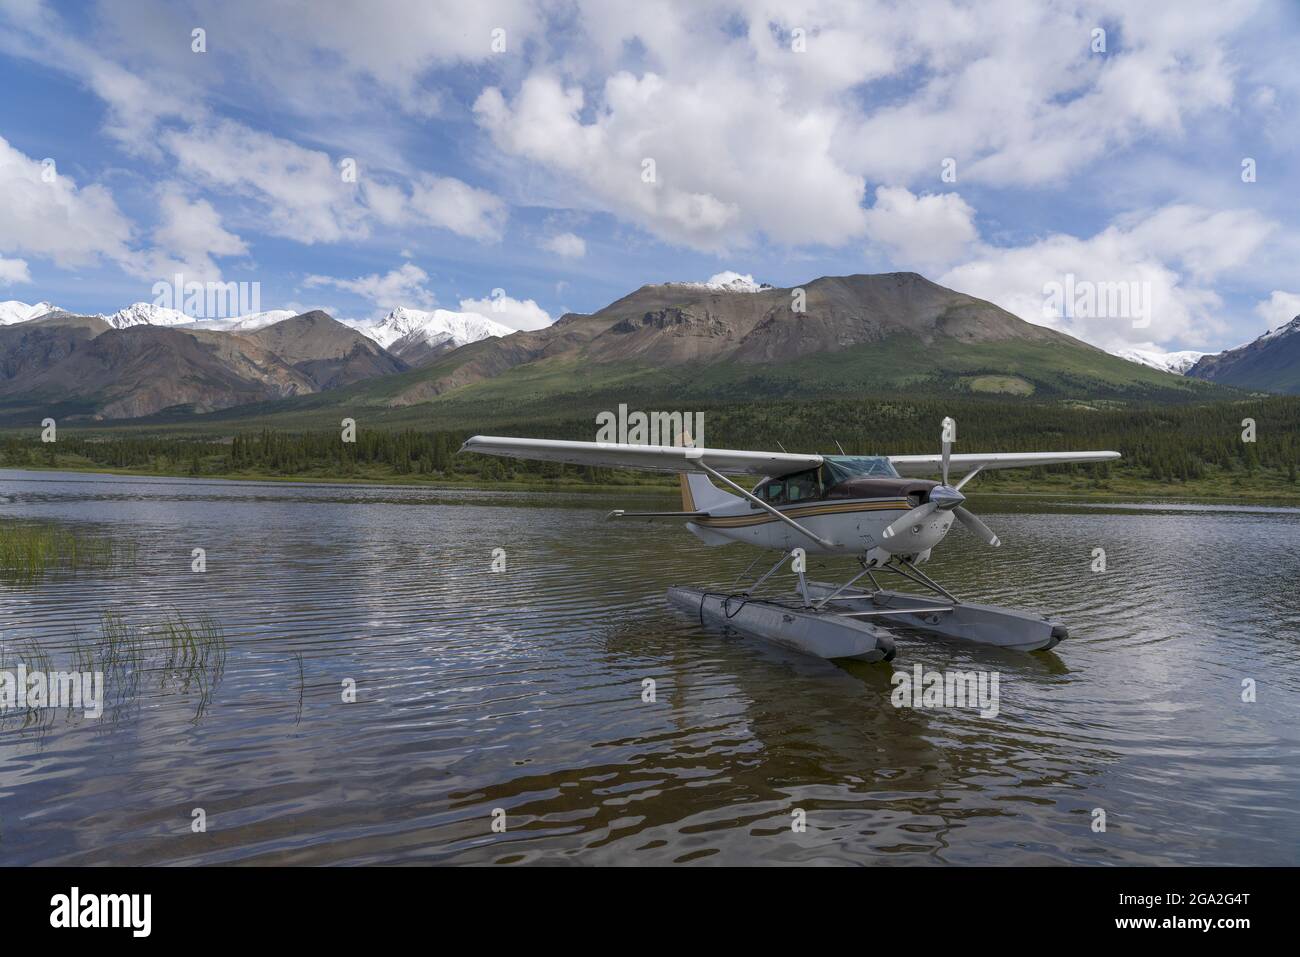 Floatplane on the water resting near the shore of a lake with mountains in the background; Kluane National Park and Reserve, Yukon, Canada Stock Photo